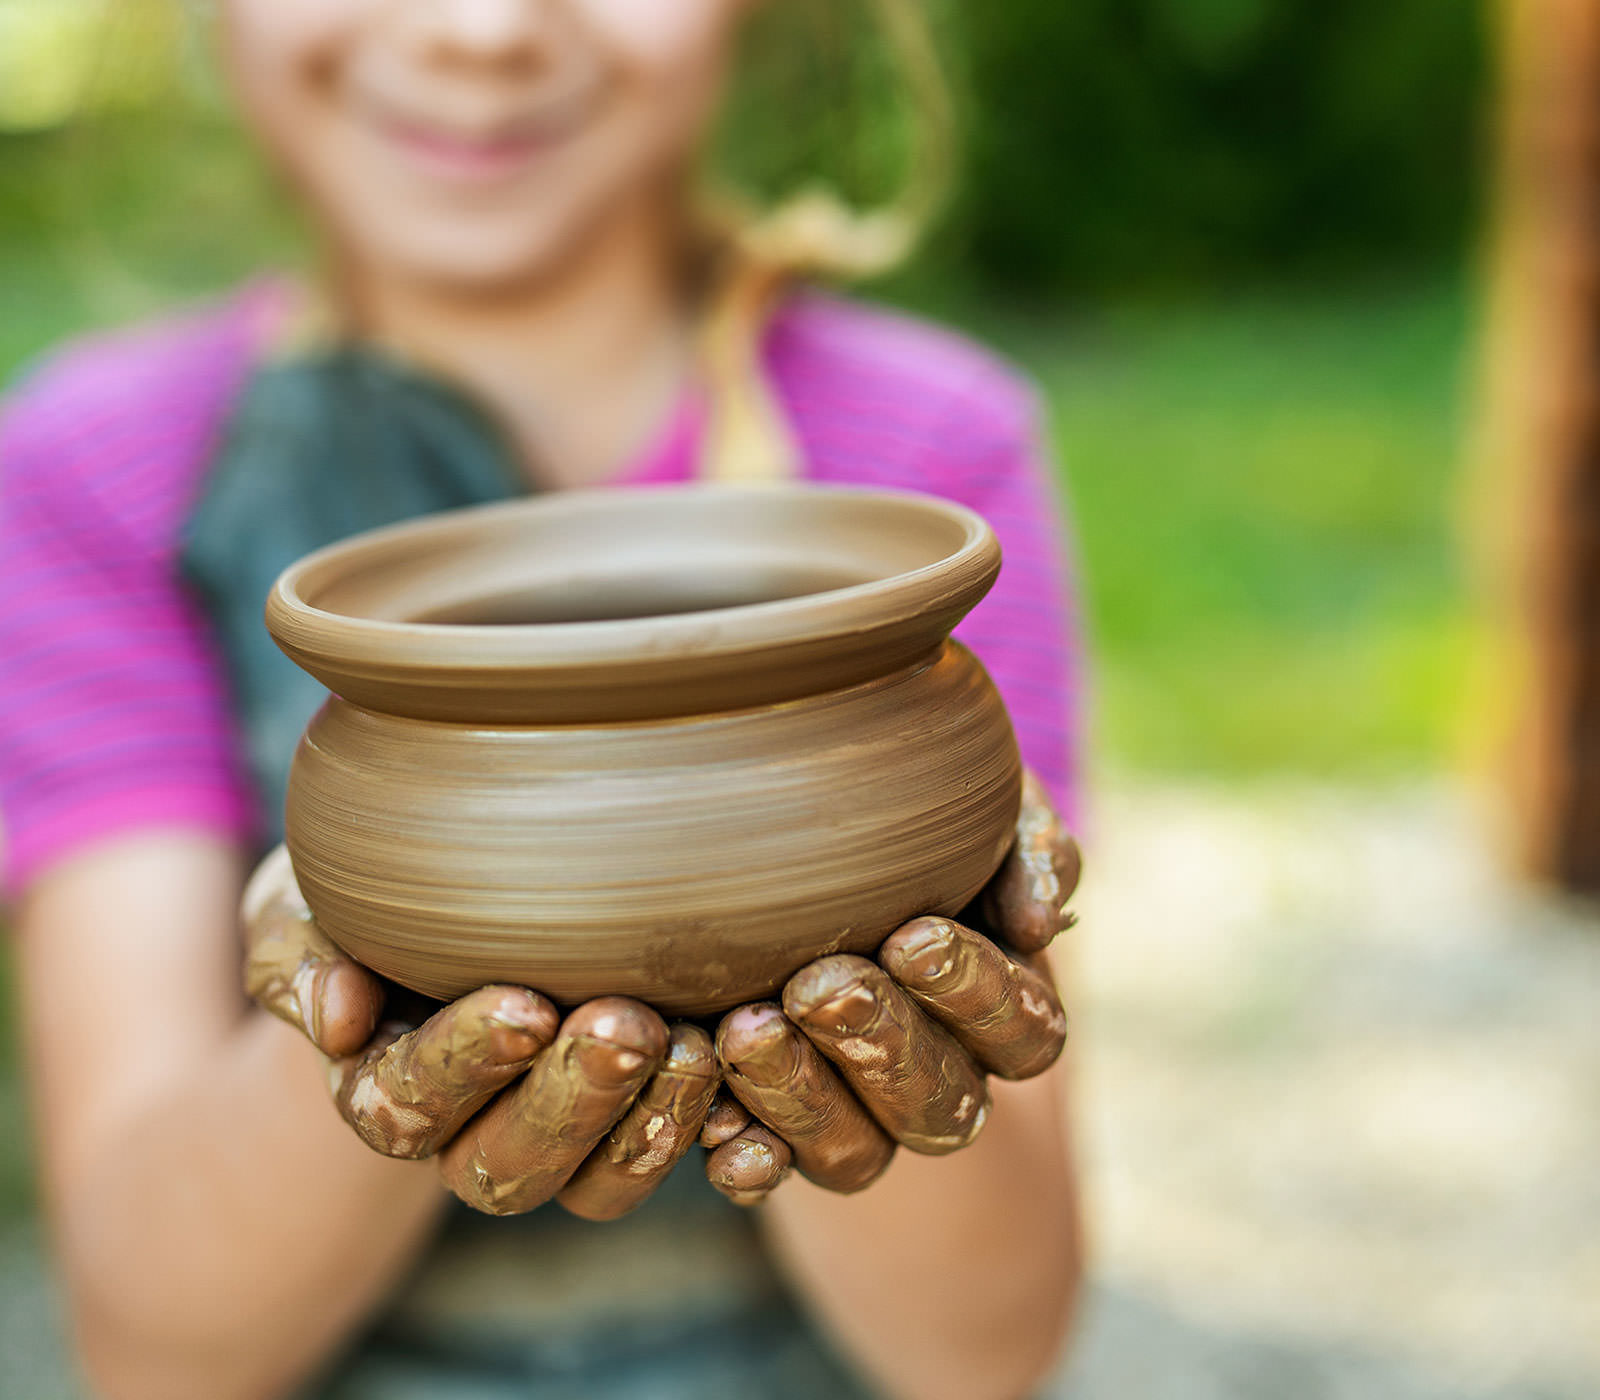 Clay, Earth & Fire: Kids Pottery Wheel & Clay Class - Fire Me Up